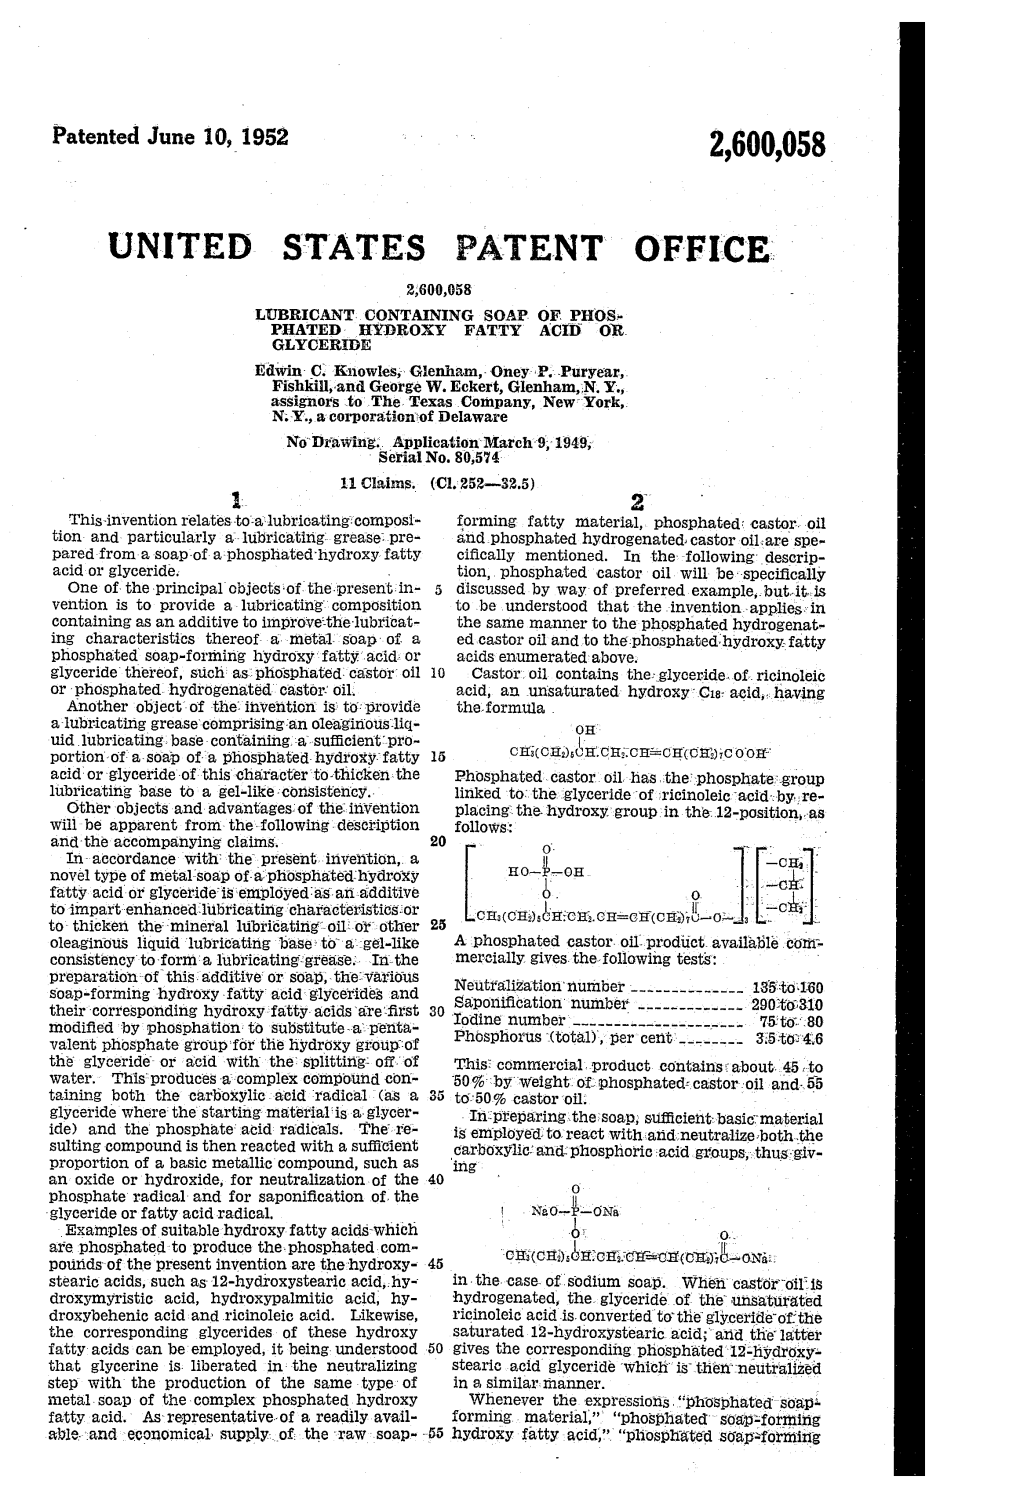 United States Patent Office 2,600,058 Lubricant Containing Soap of Phos Phated: Hydroxy Fatty Acid Or